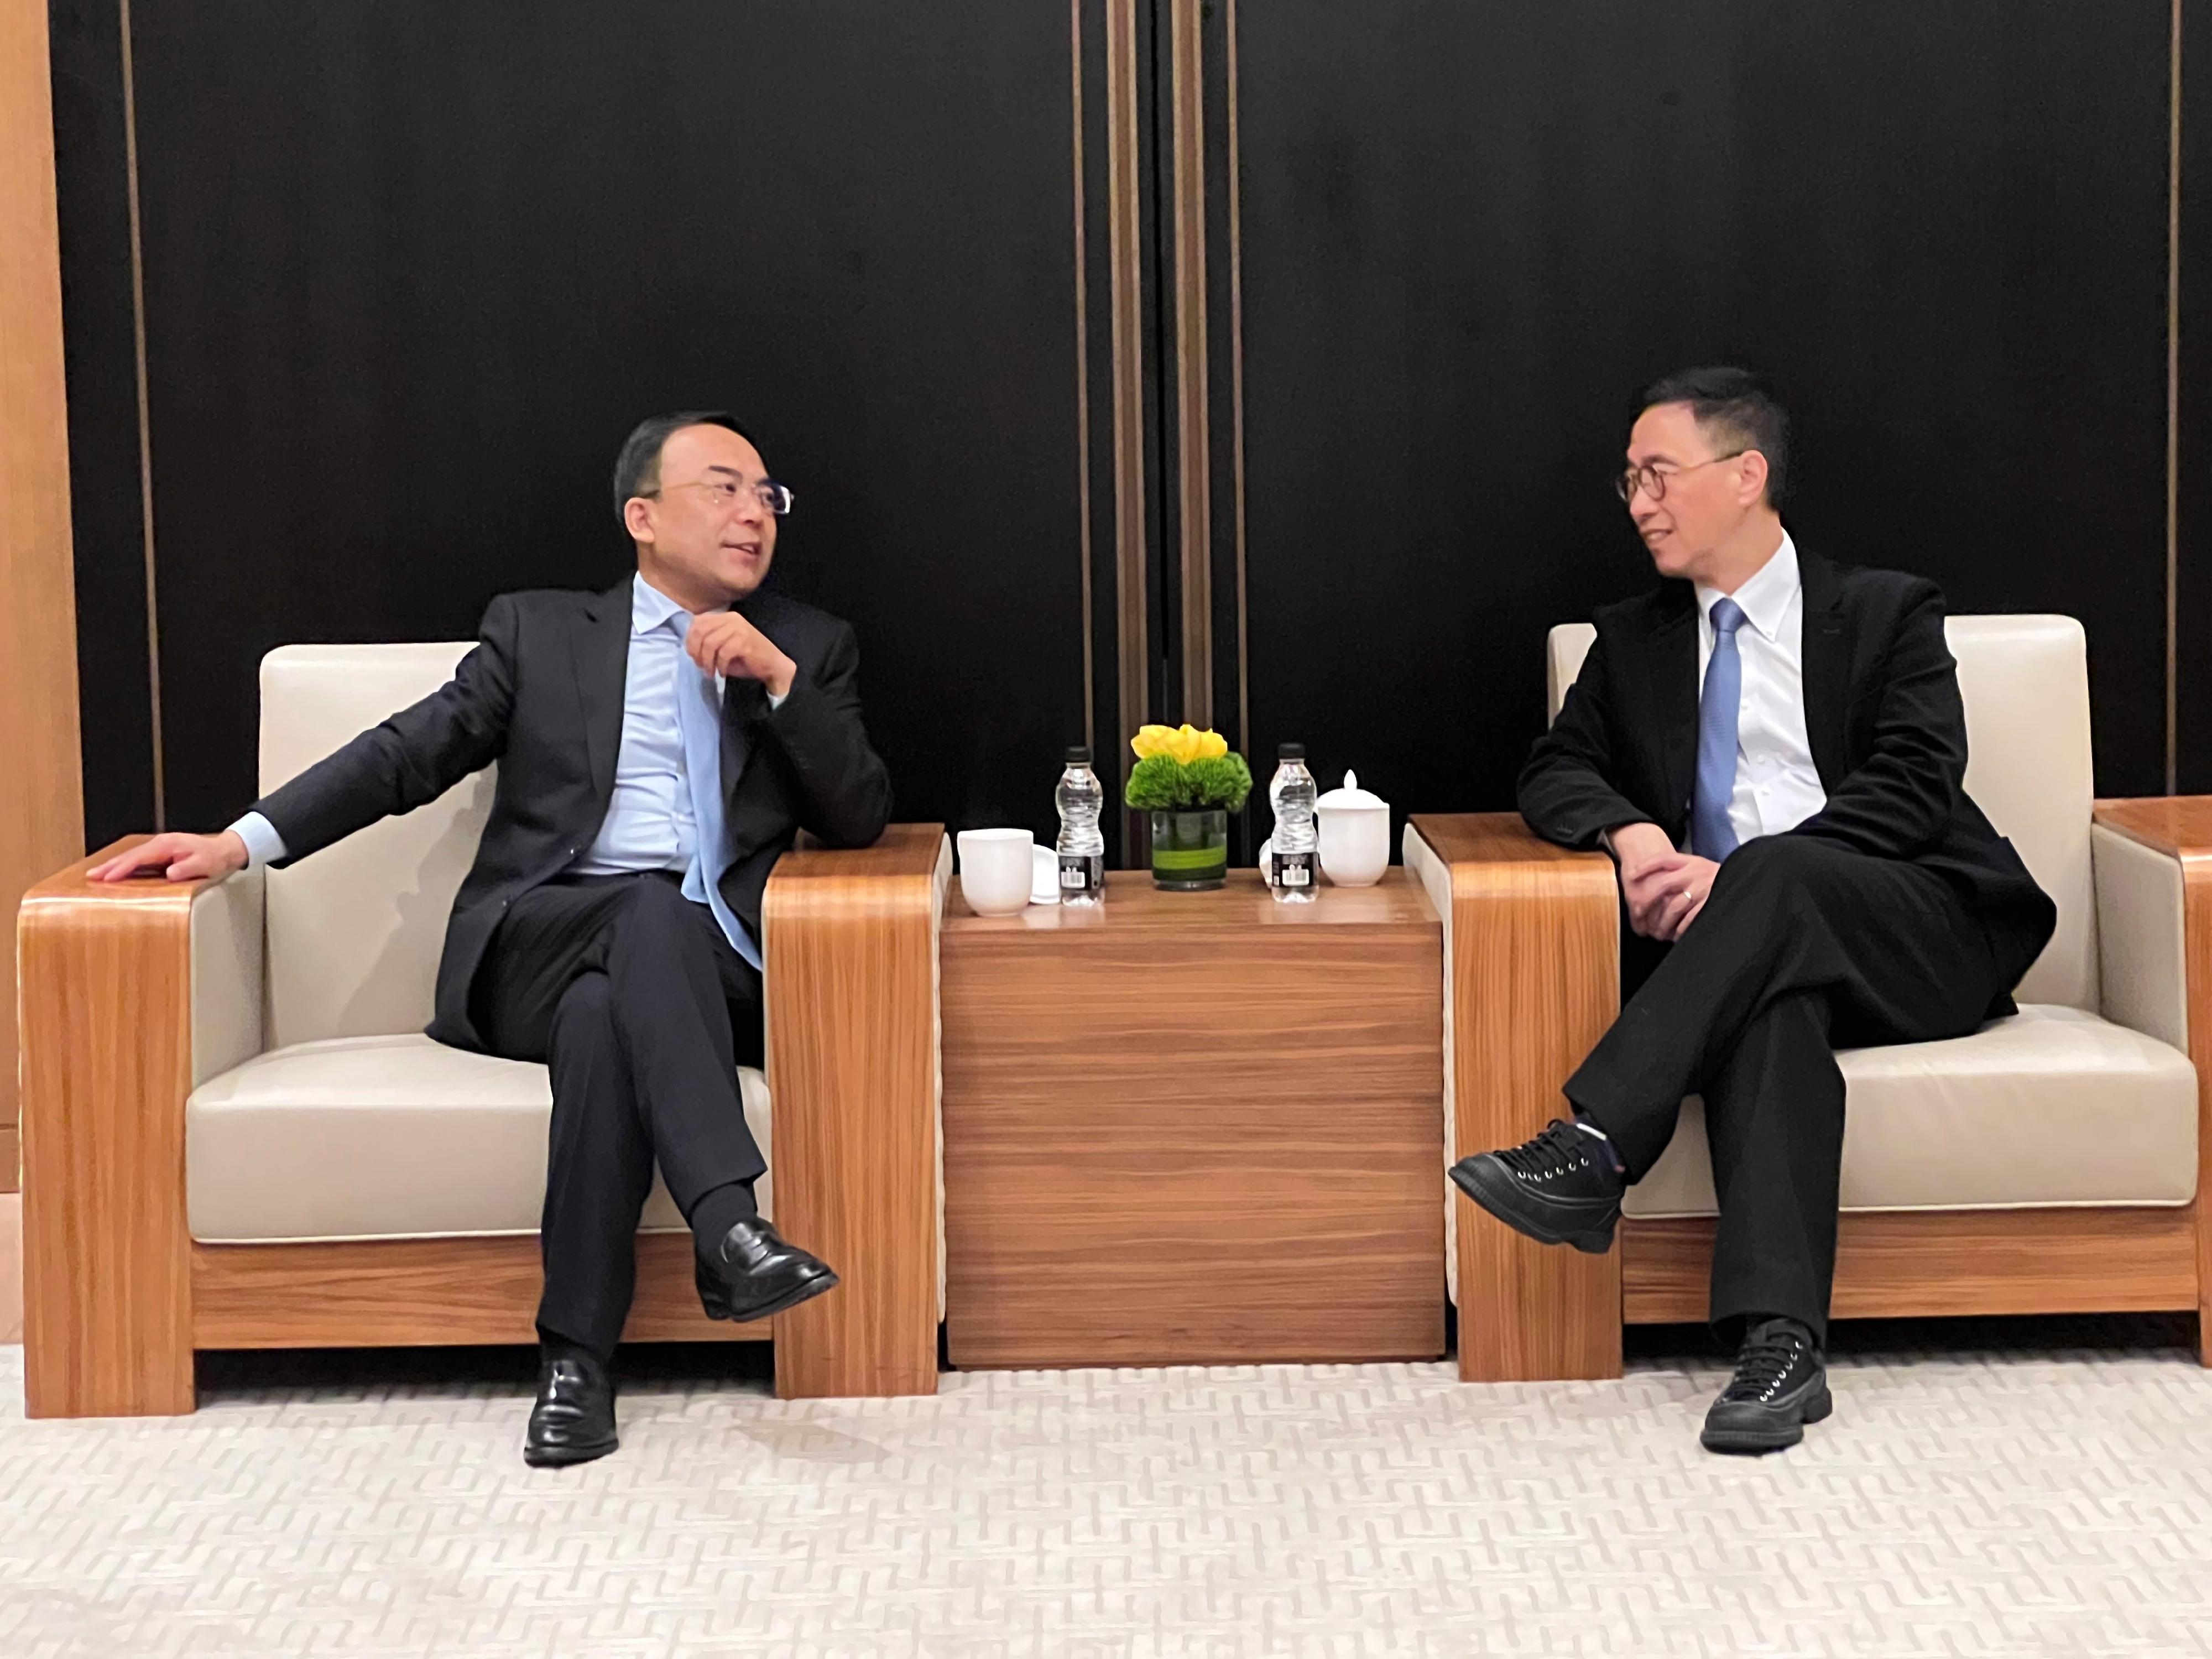 The Secretary for Culture, Sports and Tourism, Mr Kevin Yeung (right), visited Xi'an and Qingdao to promote Hong Kong tourism. On the second day of the visit (March 13), he meets with the Director of the Department of Culture and Tourism of Shaanxi, Mr Gao Yang (left), in Xi'an.